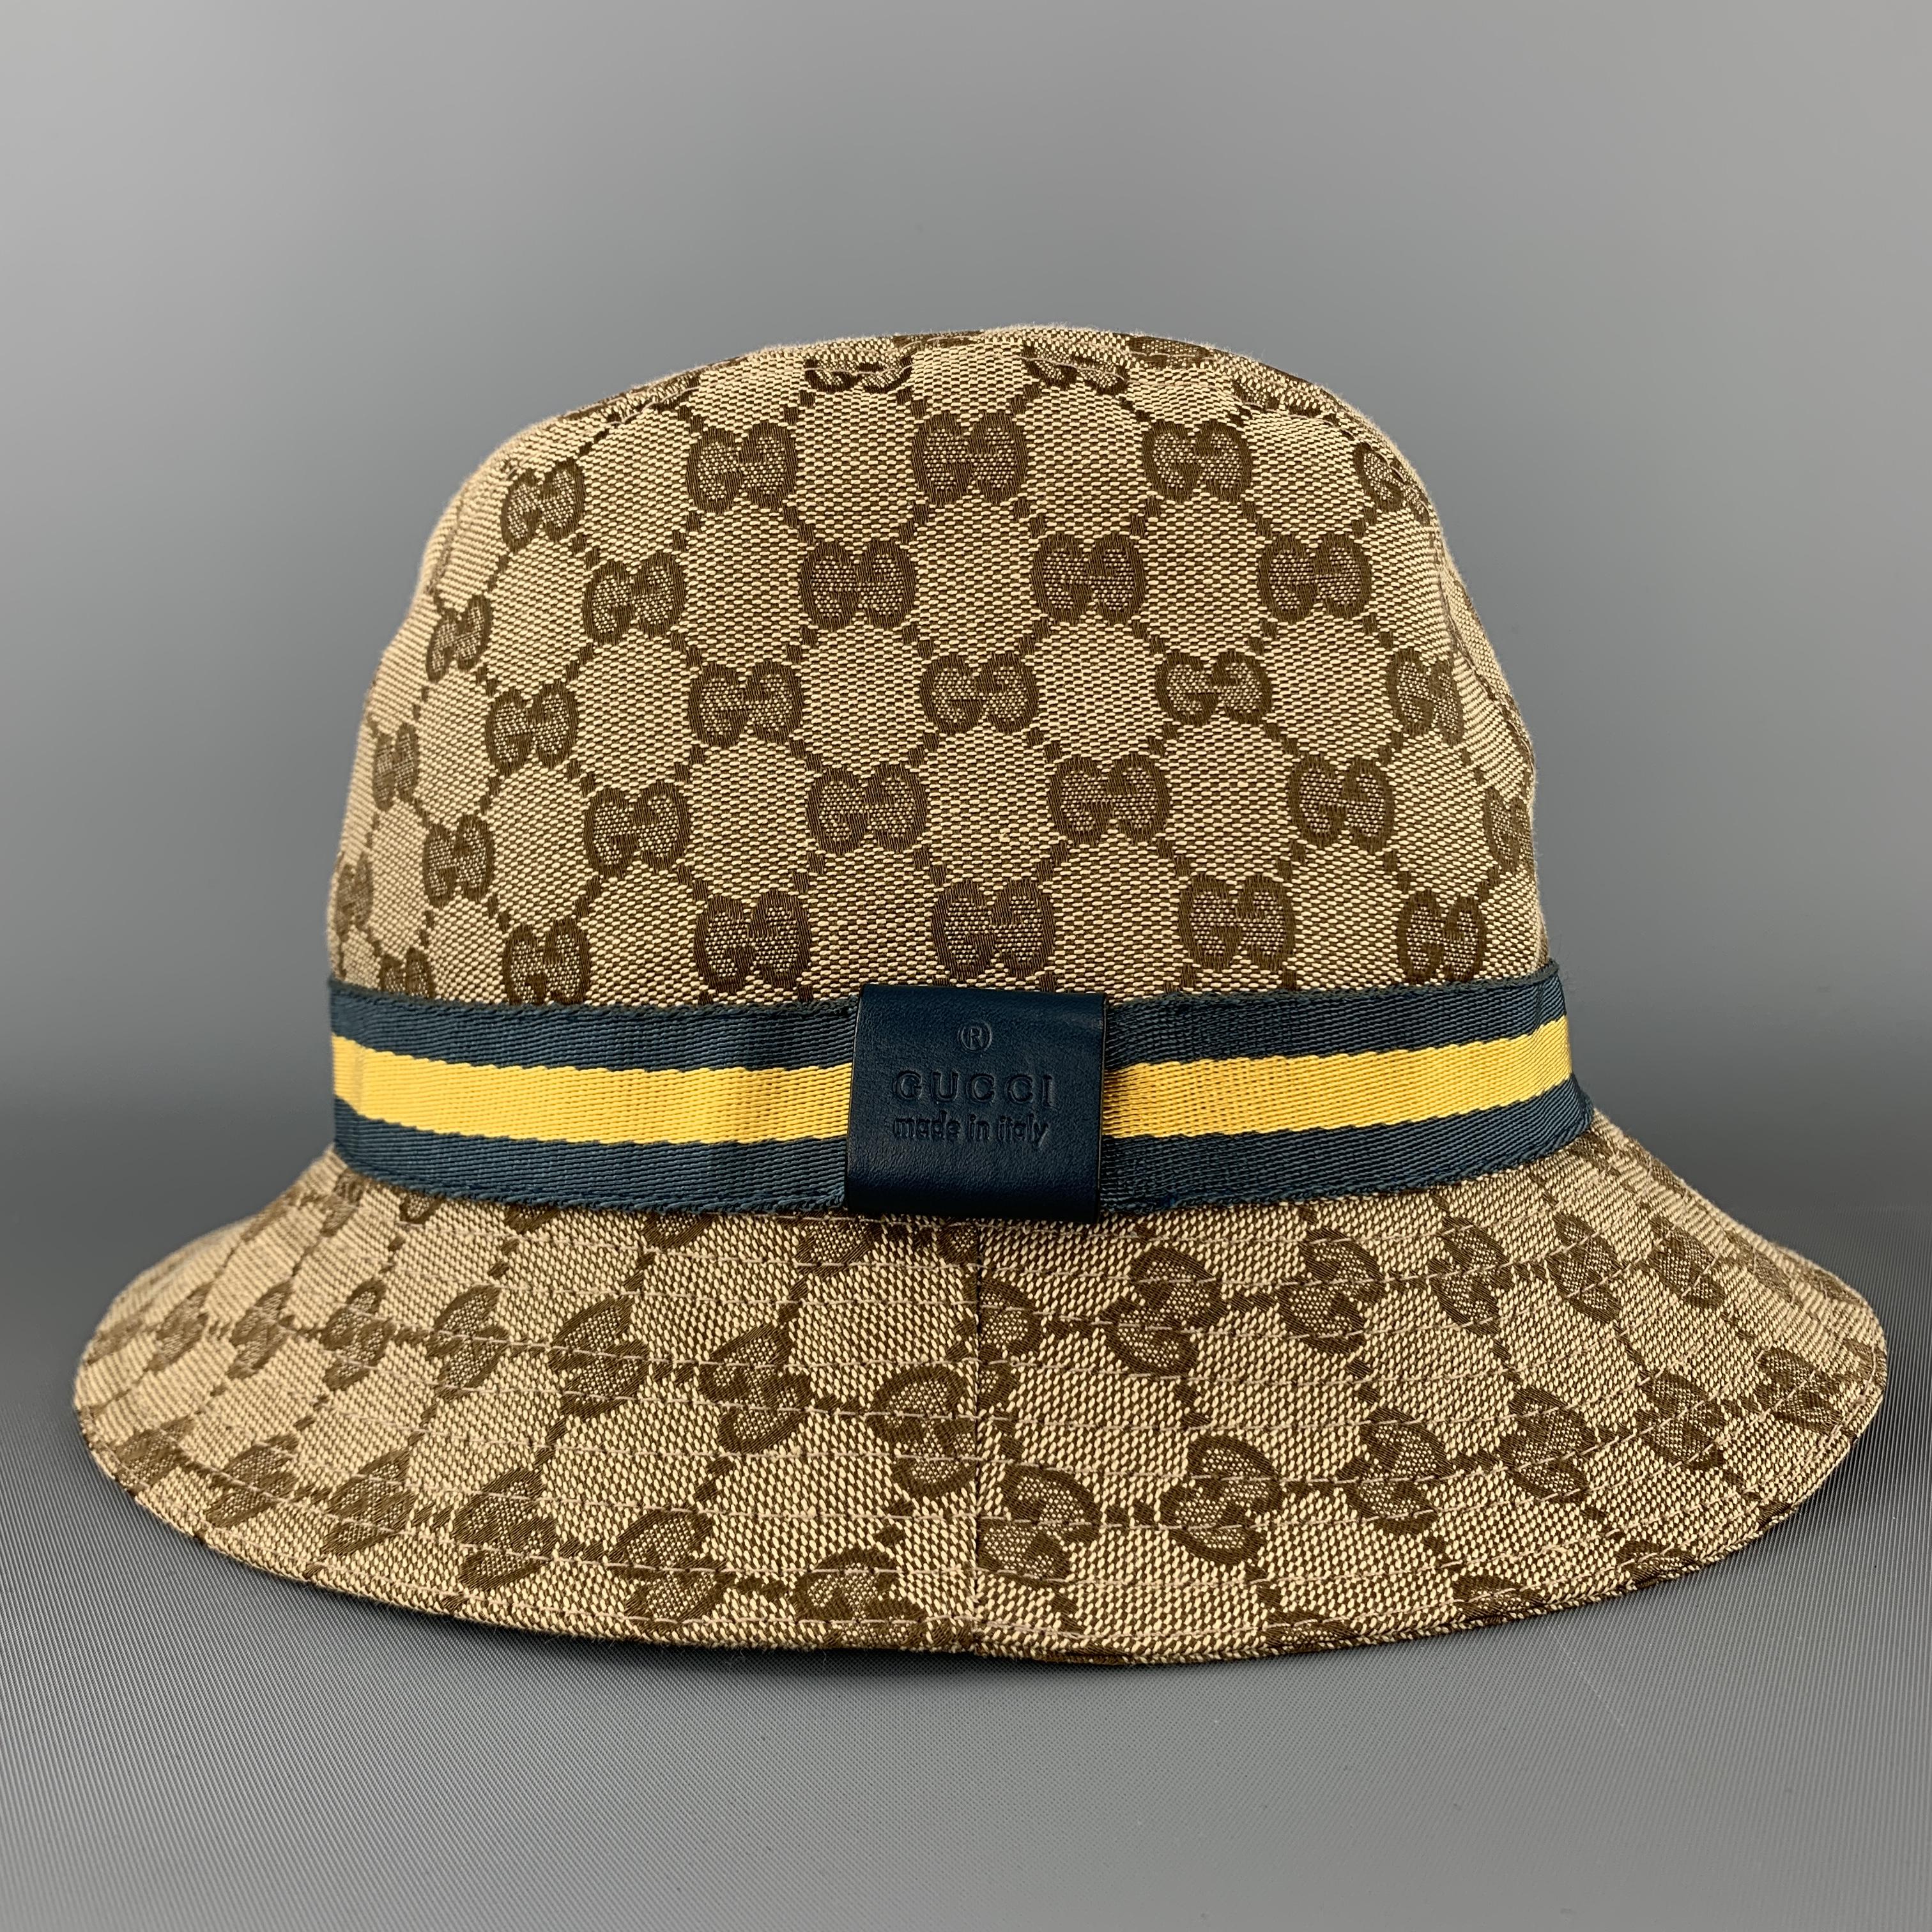 Vintage GUCCI bucket hat comes in classic beige Guccissima monogram canvas with a teal and yellow ribbon stripe. Made in Italy.

Excellent Pre-Owned Condition.
Marked: L

Measurements:

Opening: 22.5 in.
Brim: 2 in.
Height: 5 in.